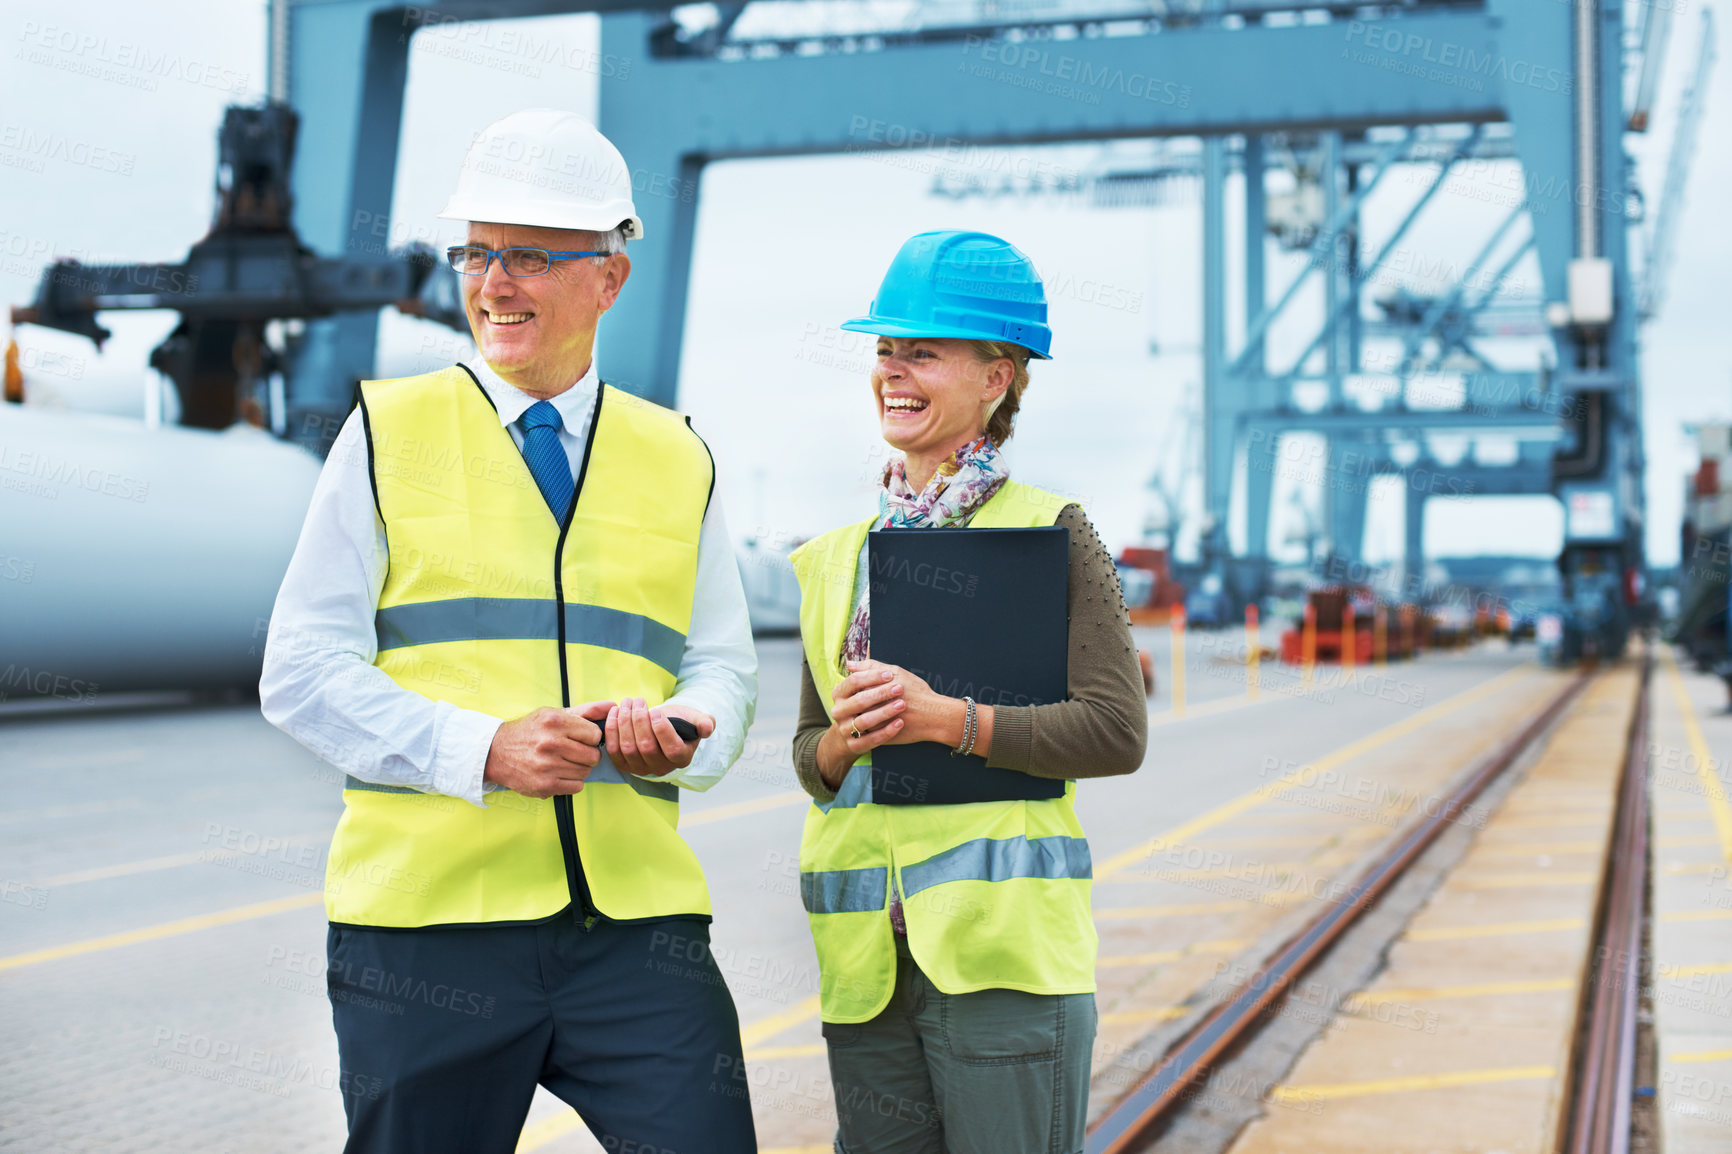 Buy stock photo Two dock workers standing together and smiling while on the job